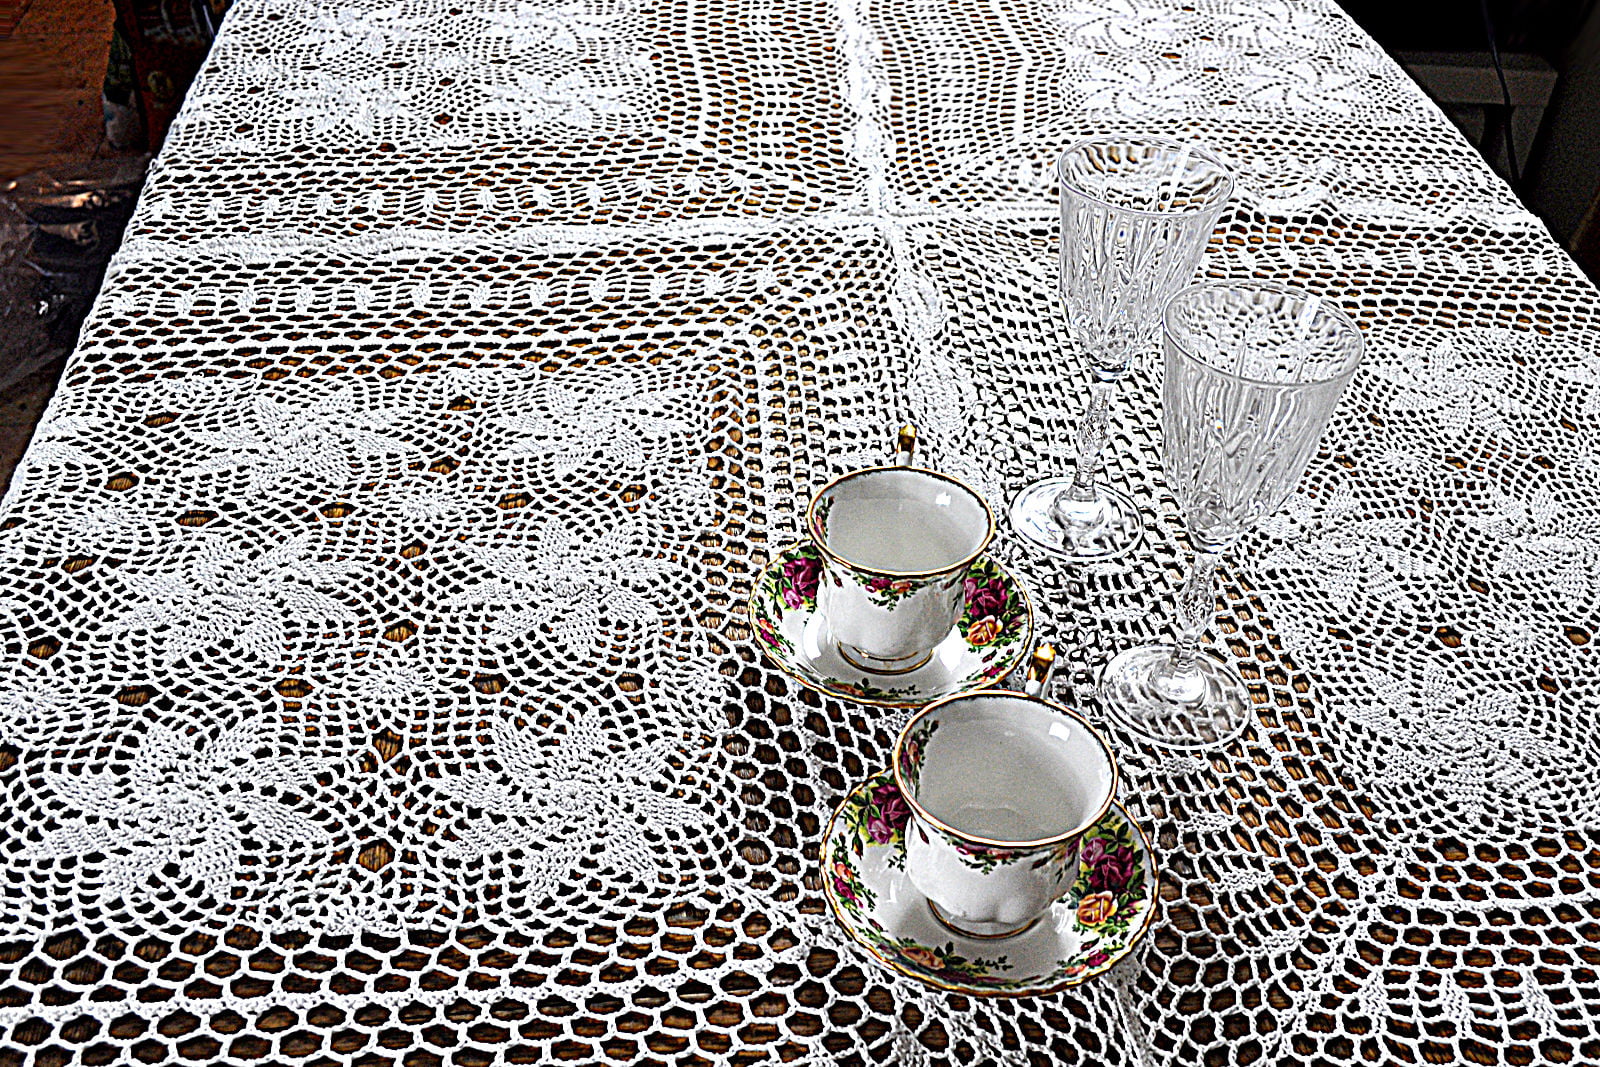 Home Vintage Crochet Lace Doilies Placemat Table Runner 31"x31" White Tablecloth 